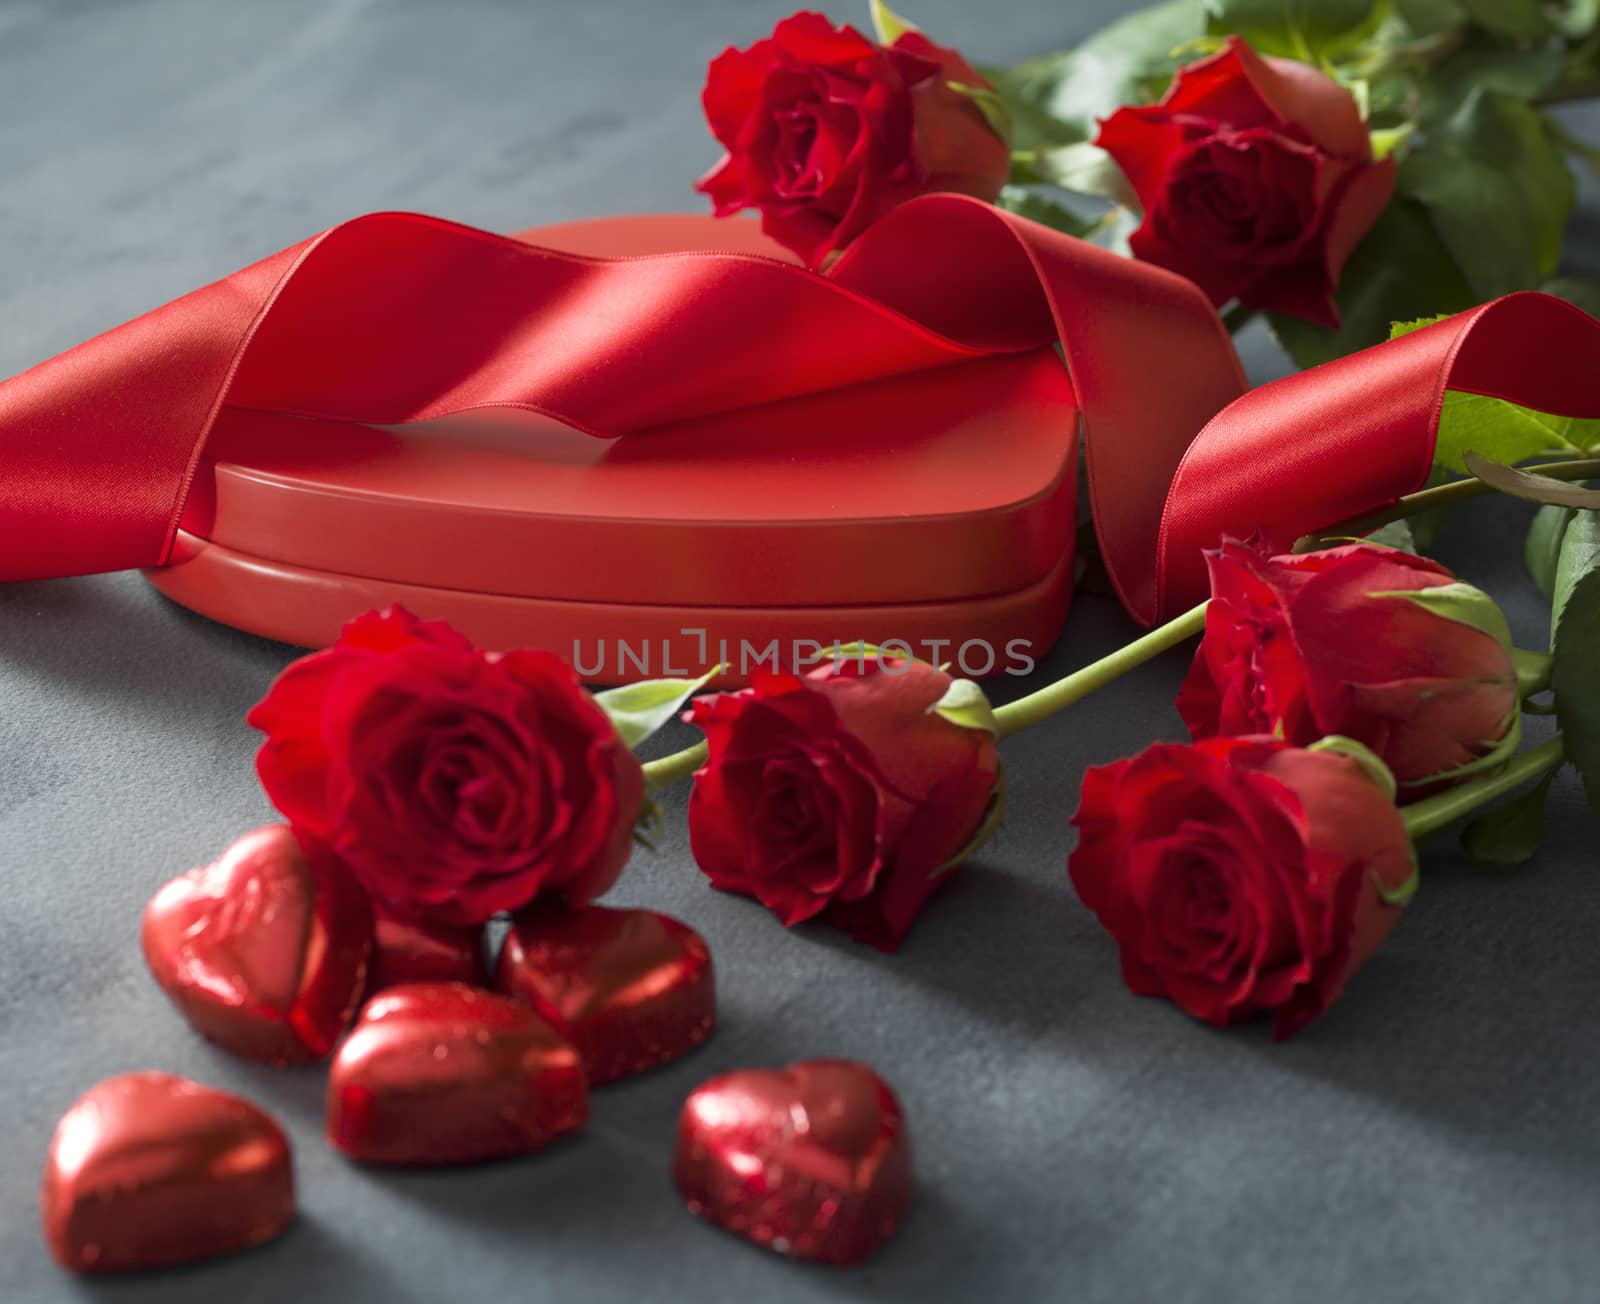 Heart shaped box with red hearts roses and ribbon by janssenkruseproductions